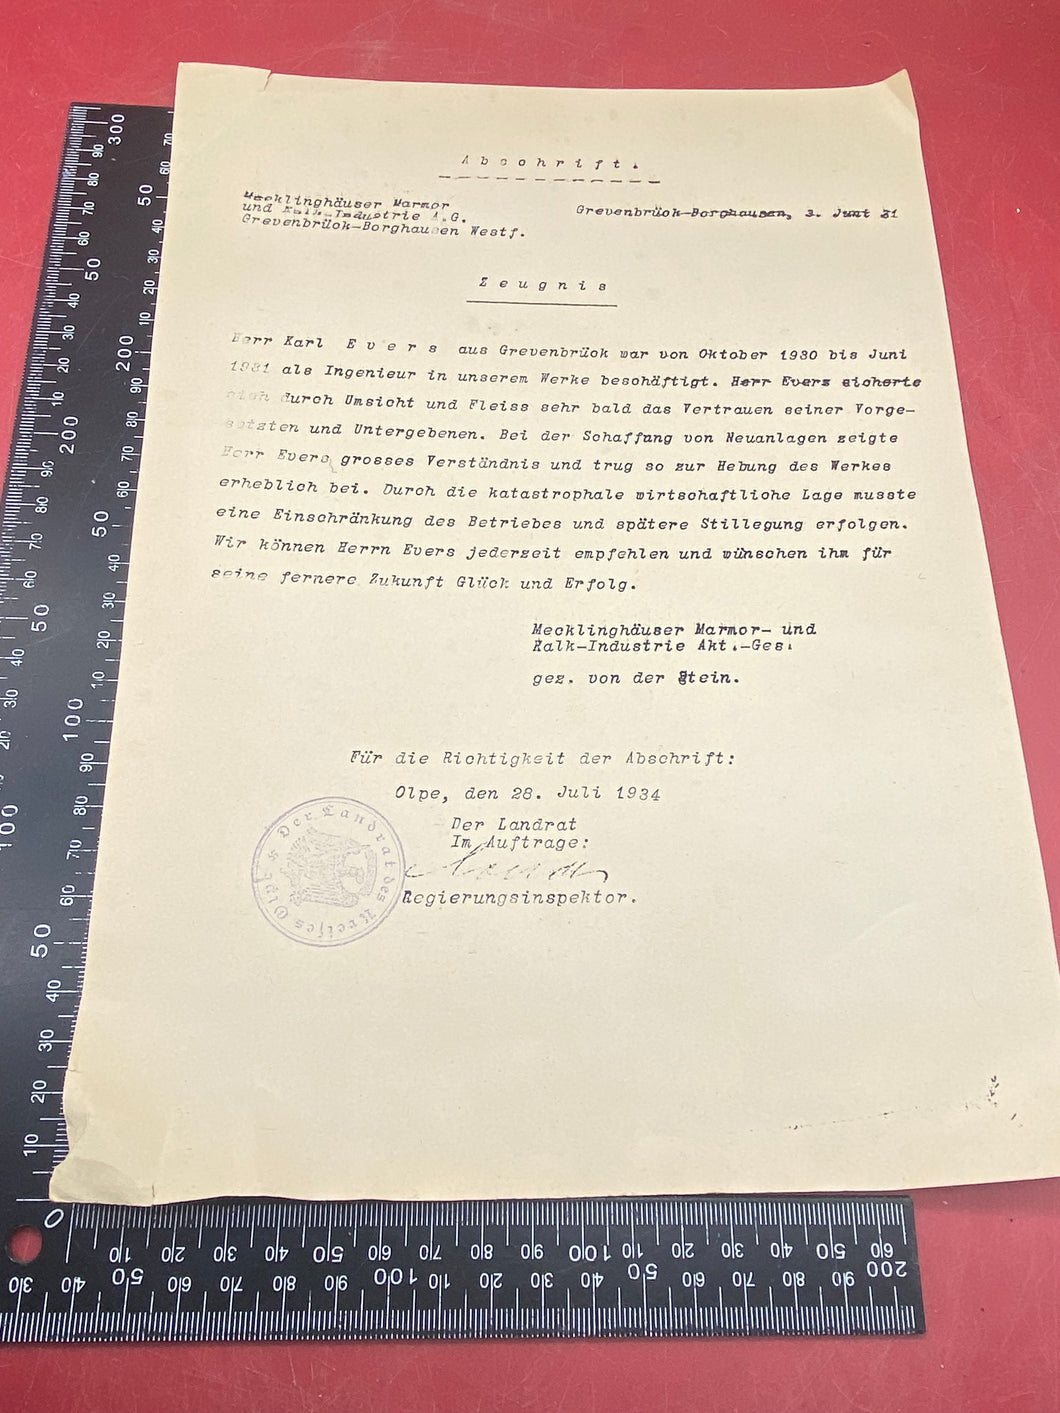 WW2 German Document Dated 1934. Interesting Original Paper with Stamp.